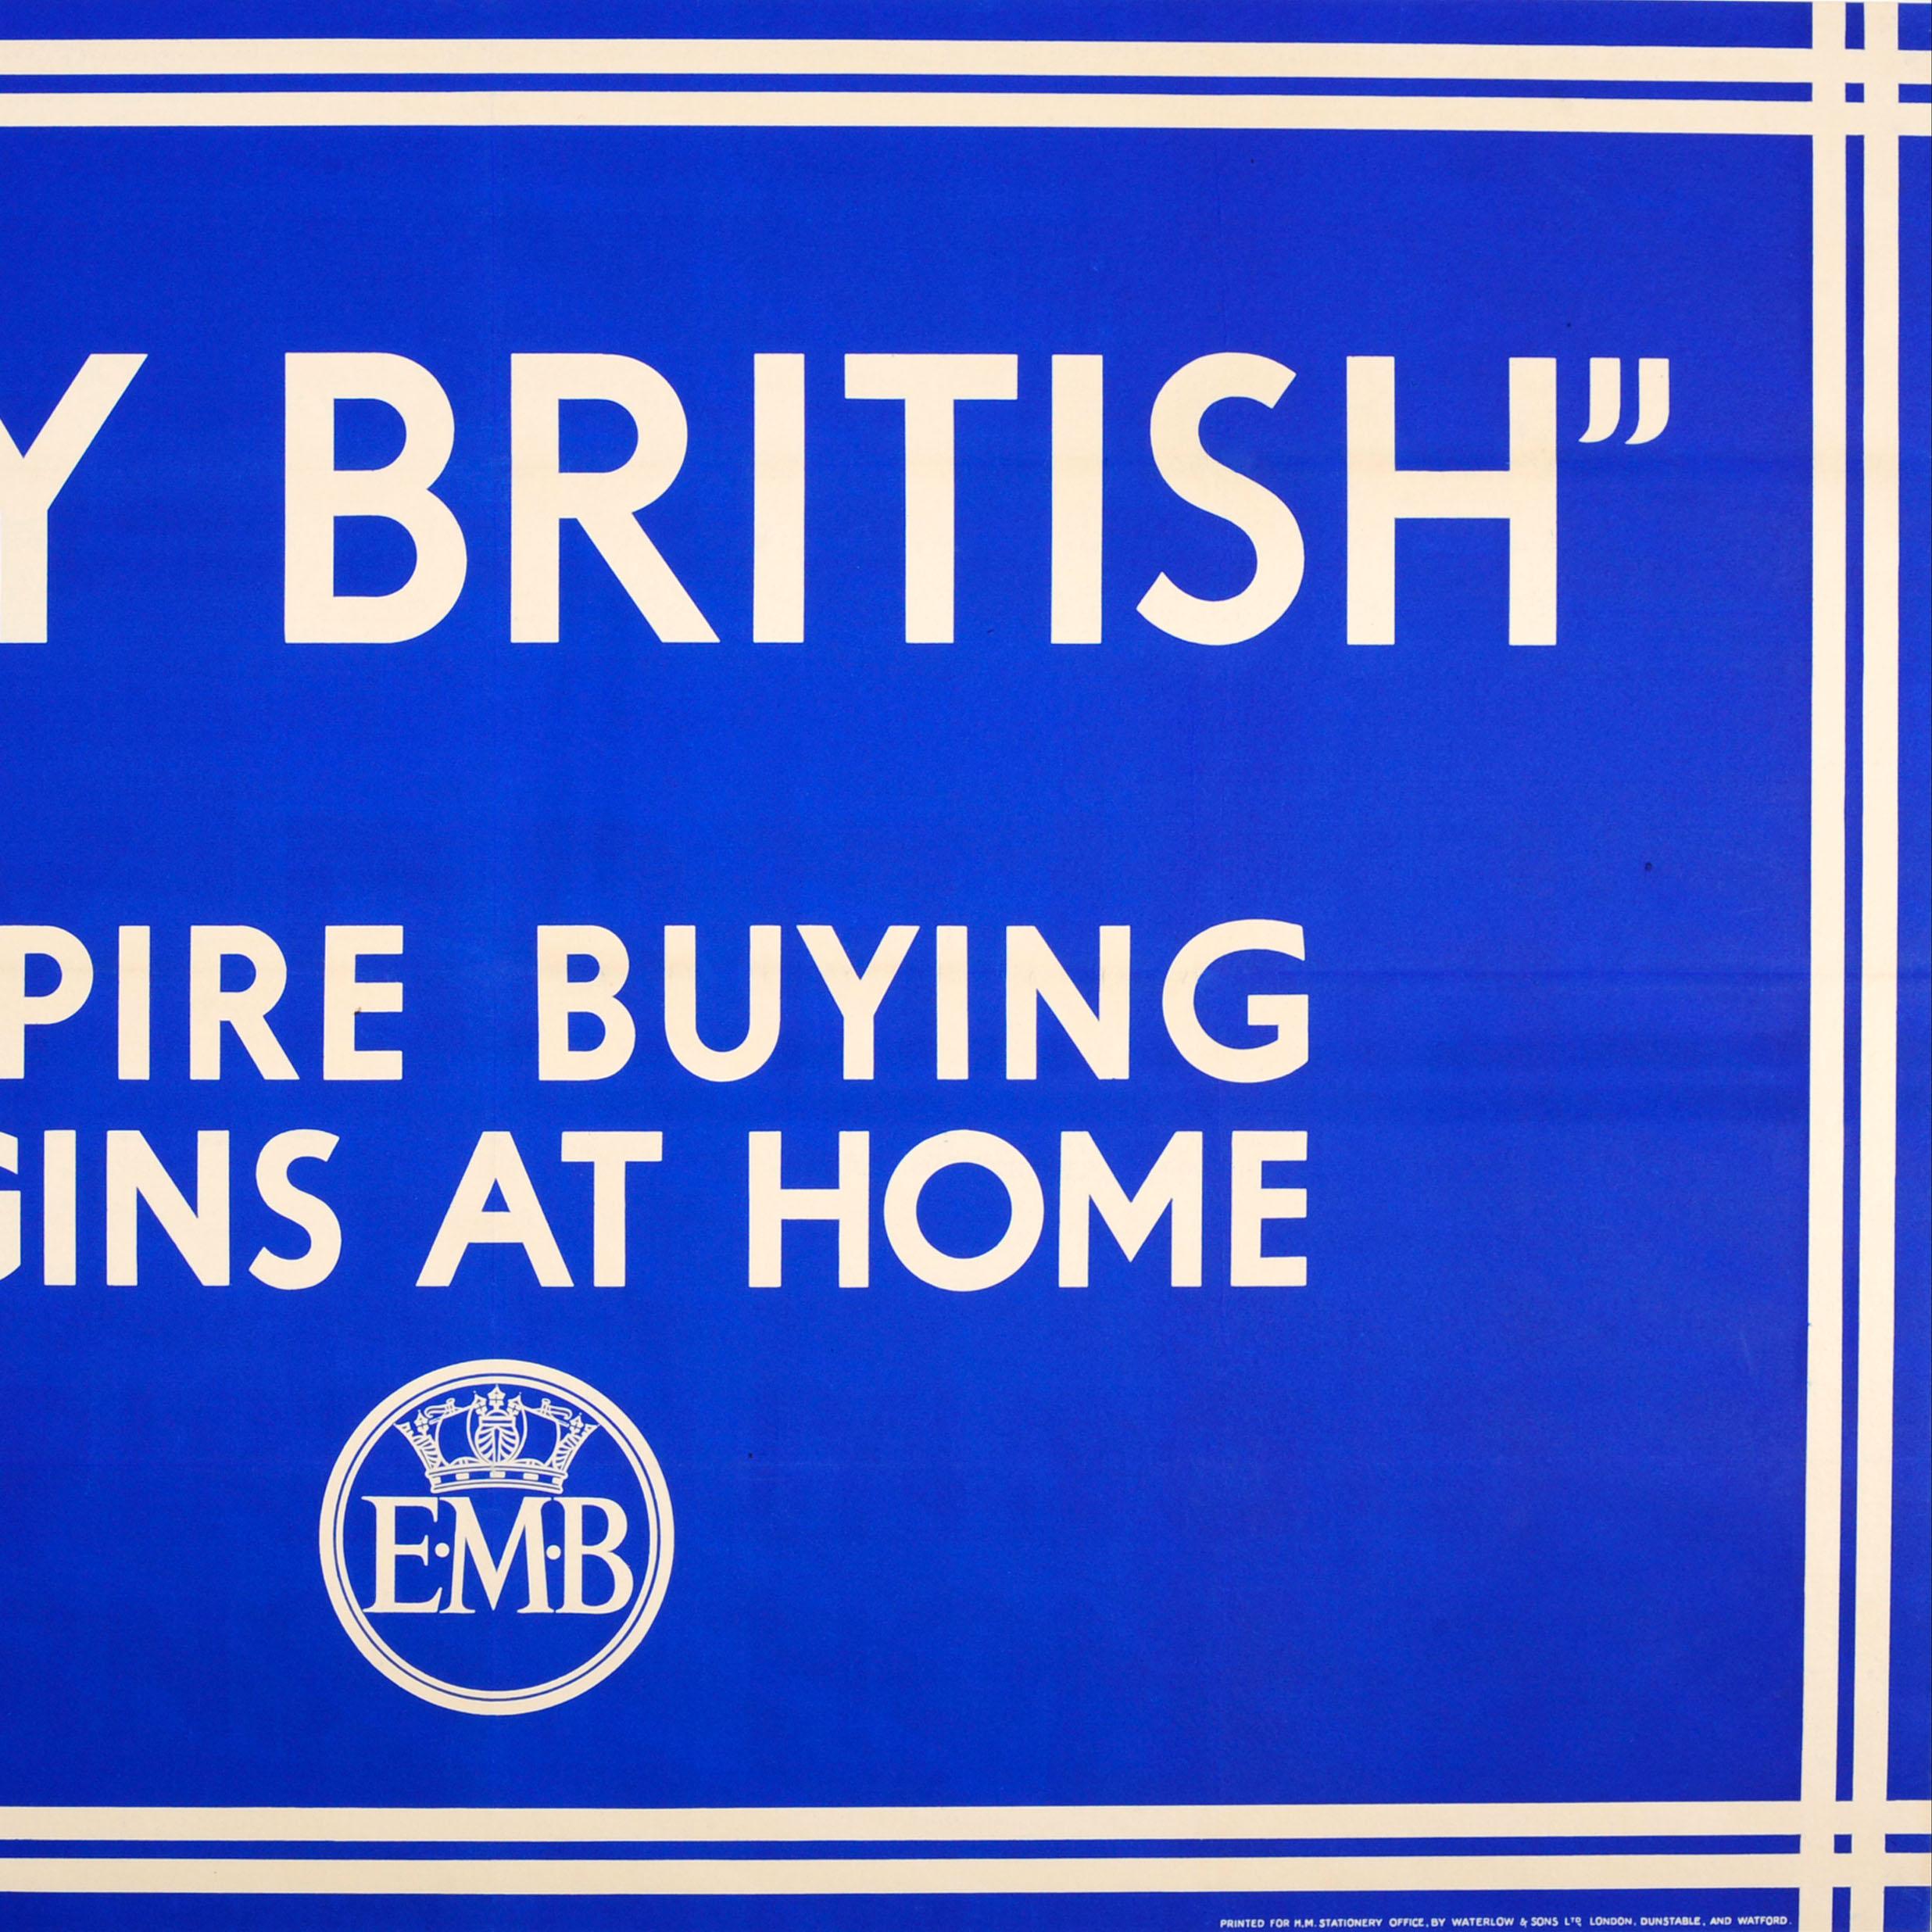 Mid-20th Century Original Vintage Advertising Poster Buy British Empire Buying Begins At Home EMB For Sale